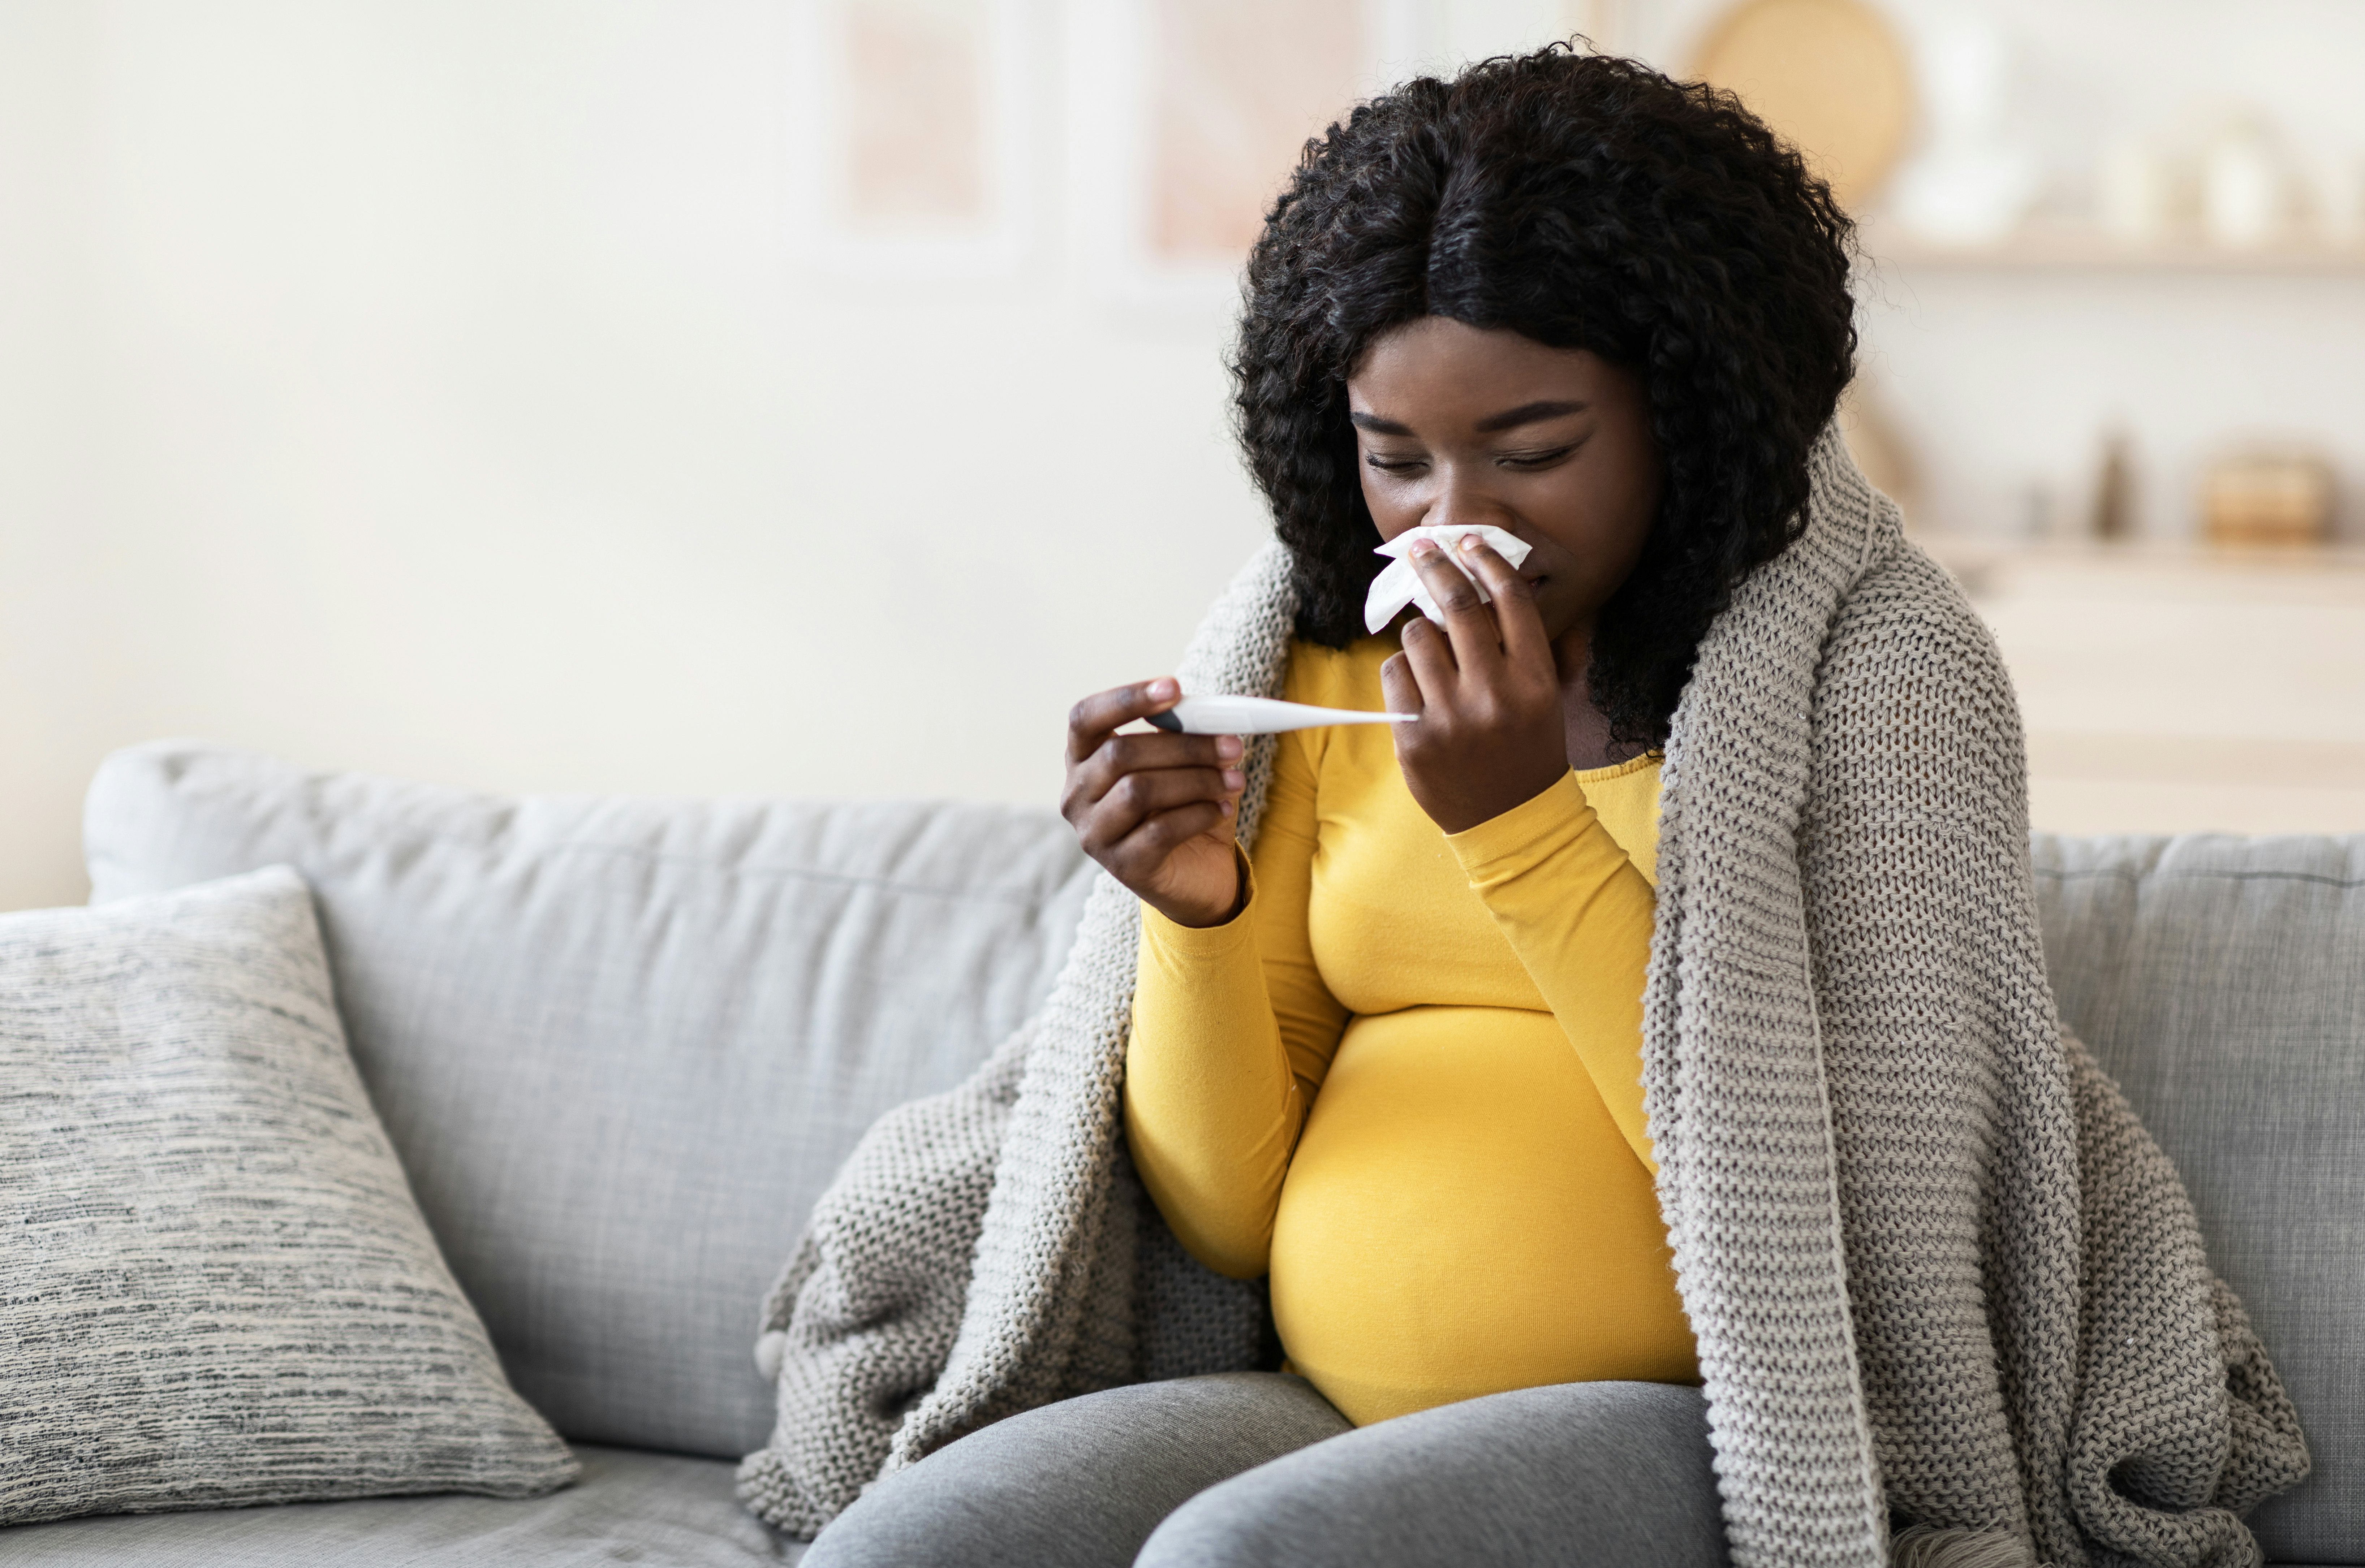 Certain medications are prohibited during pregnancy, even for treating something as simple as a cold...